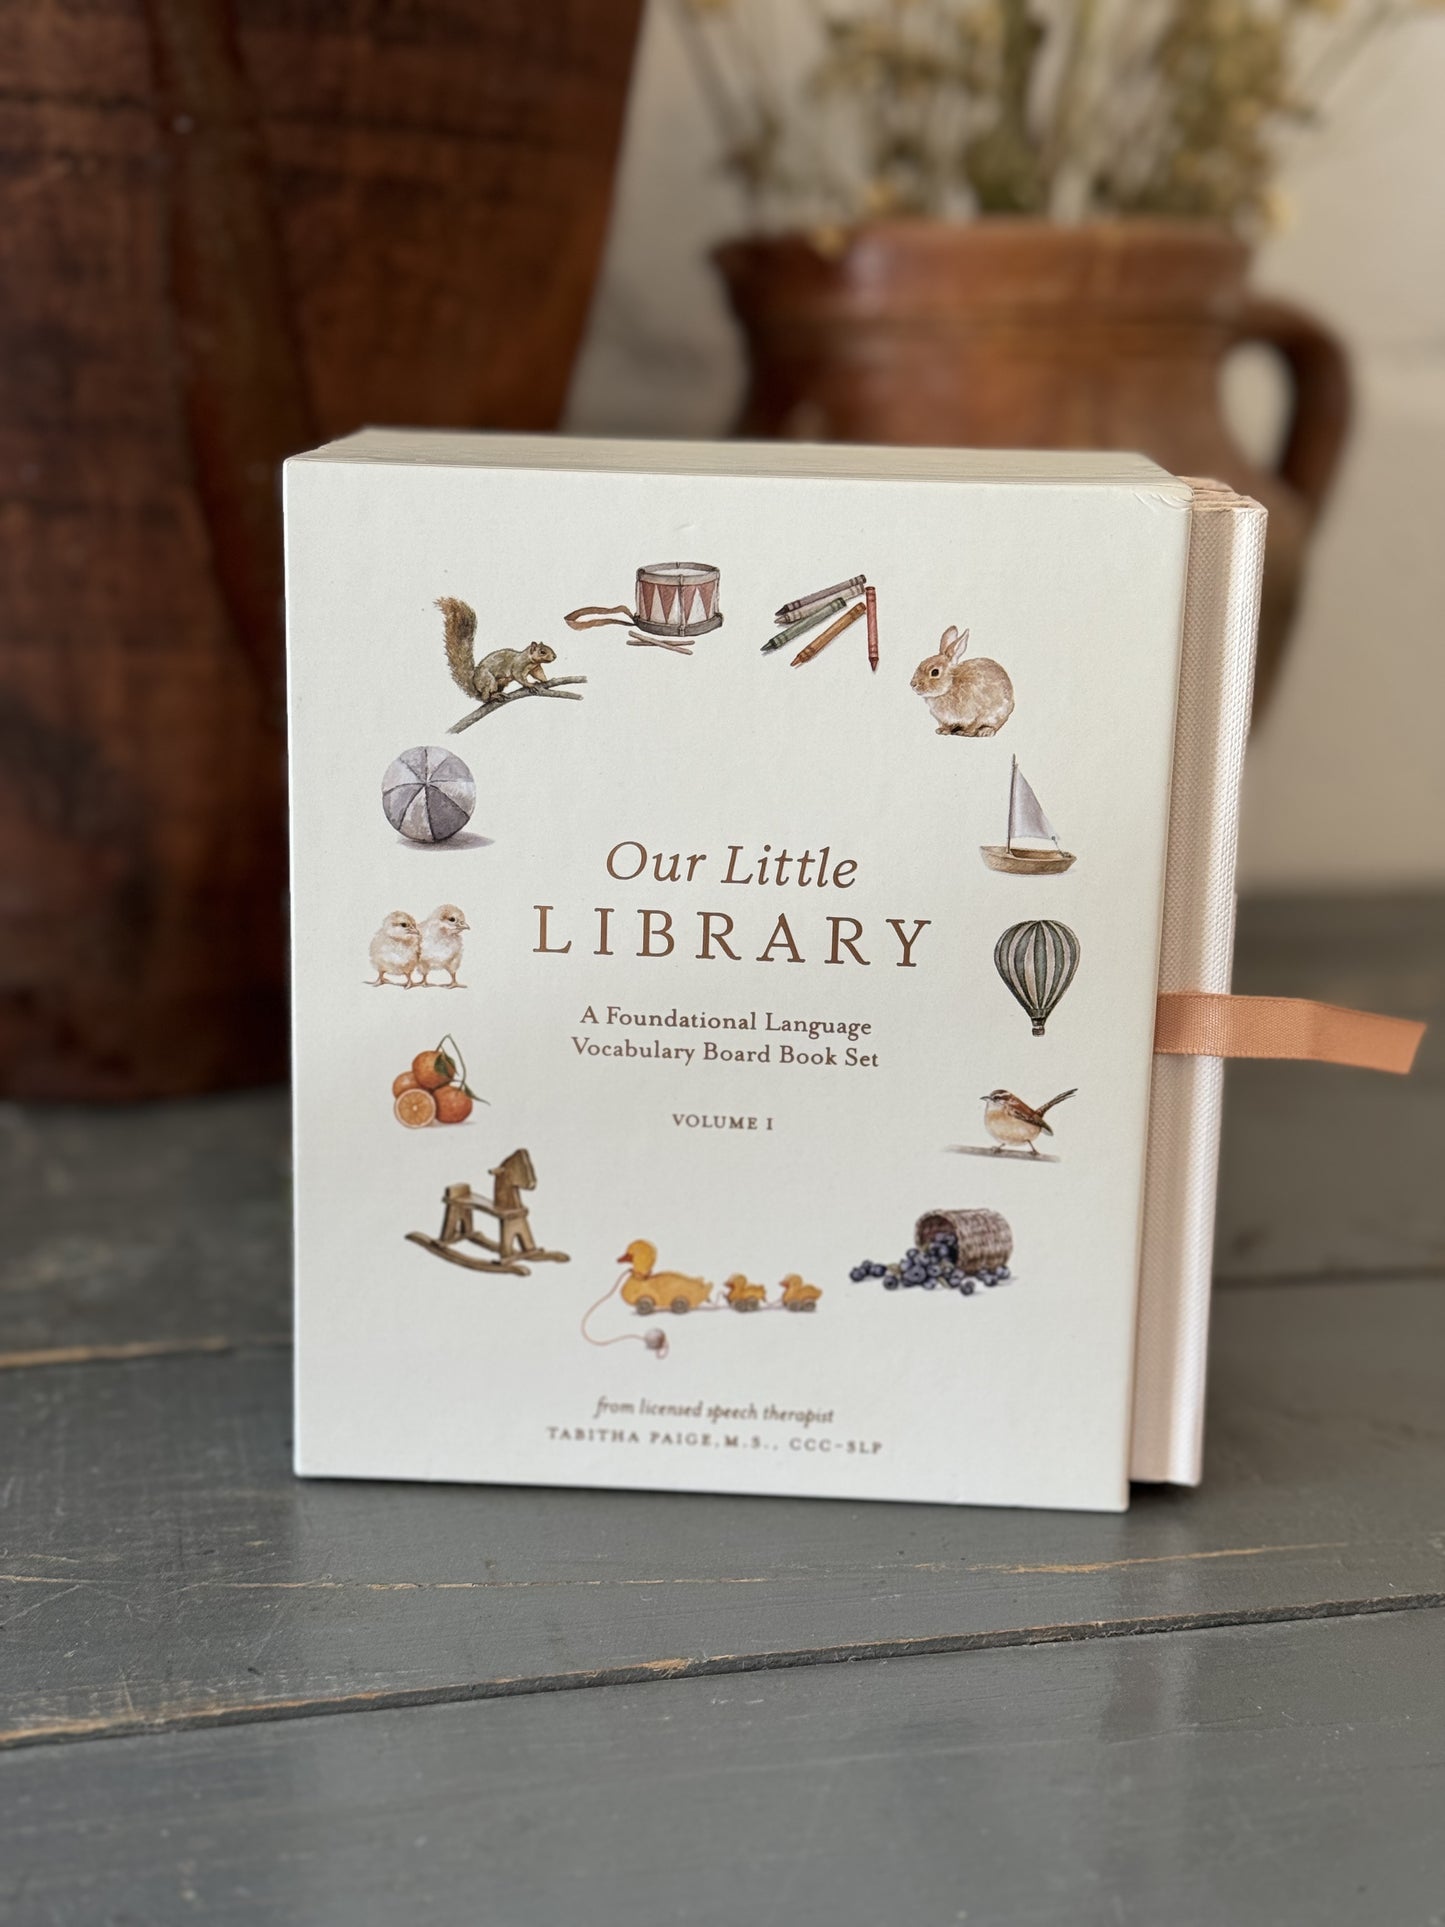 “Our Little Library” Vocabulary Book Set